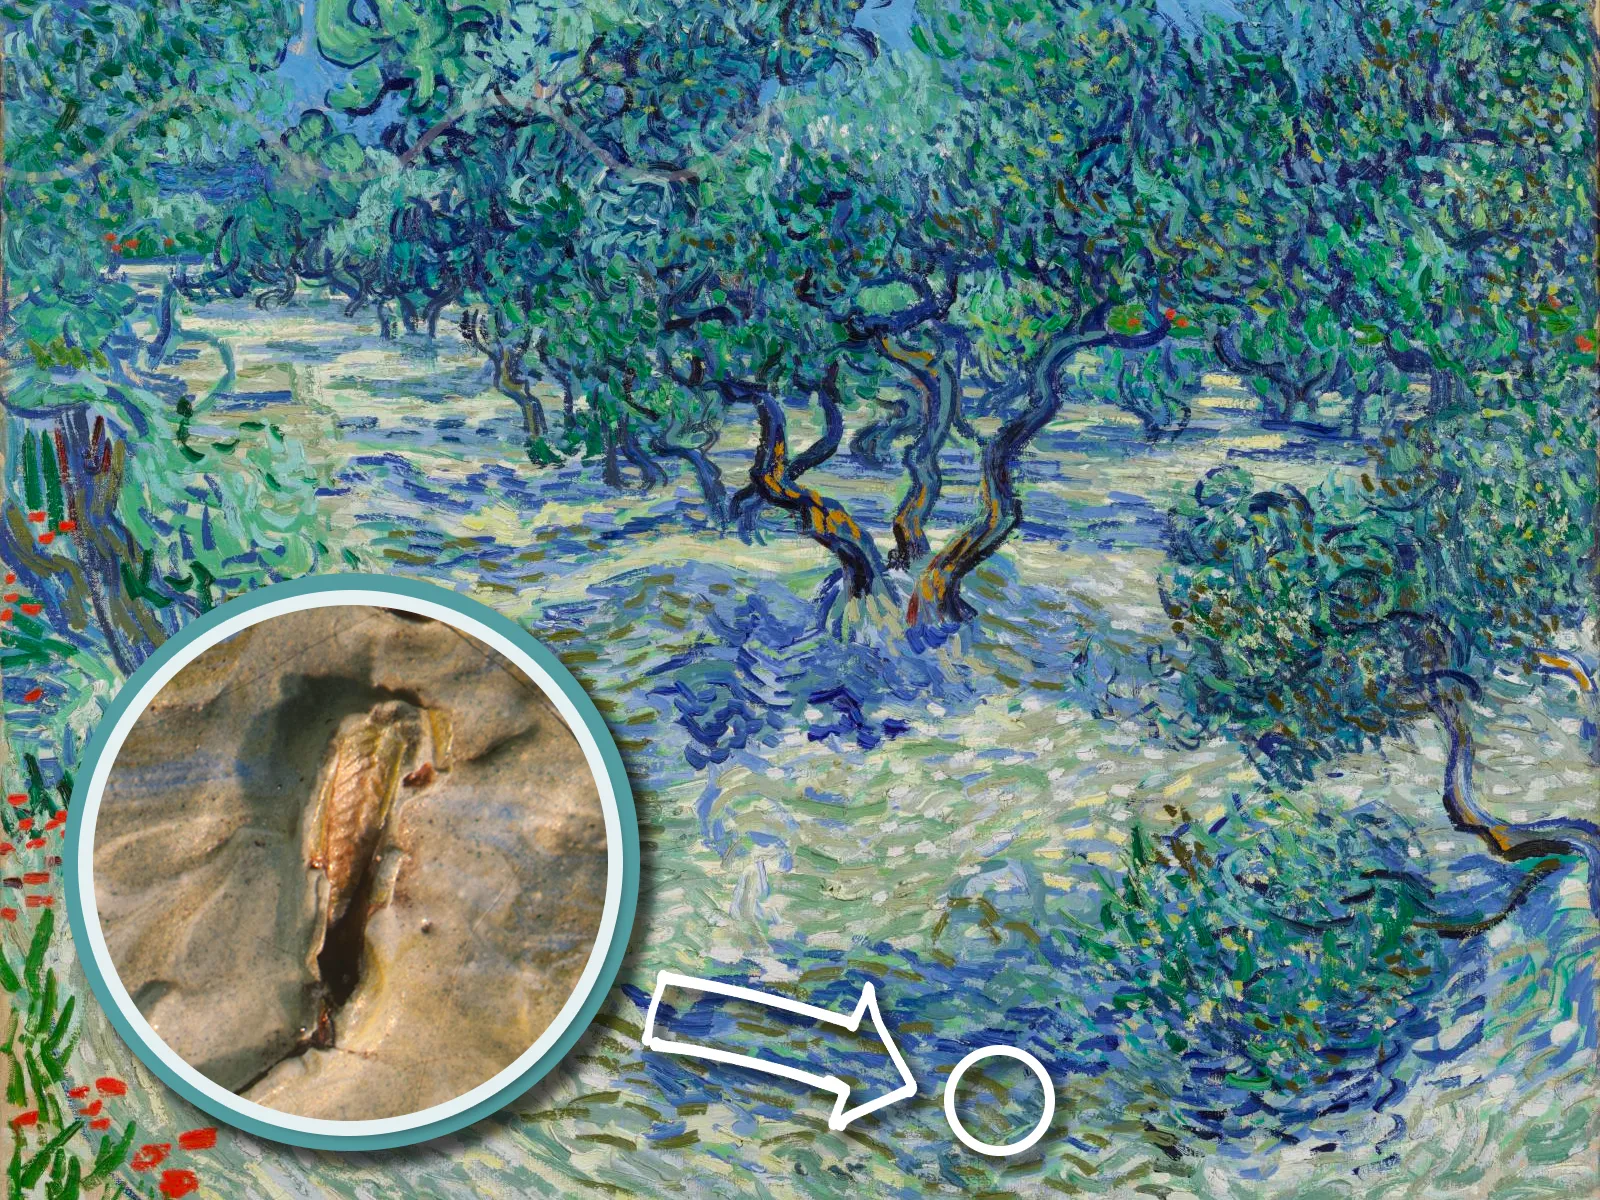 How Did This Grasshopper End Up Trapped in a Vincent van Gogh